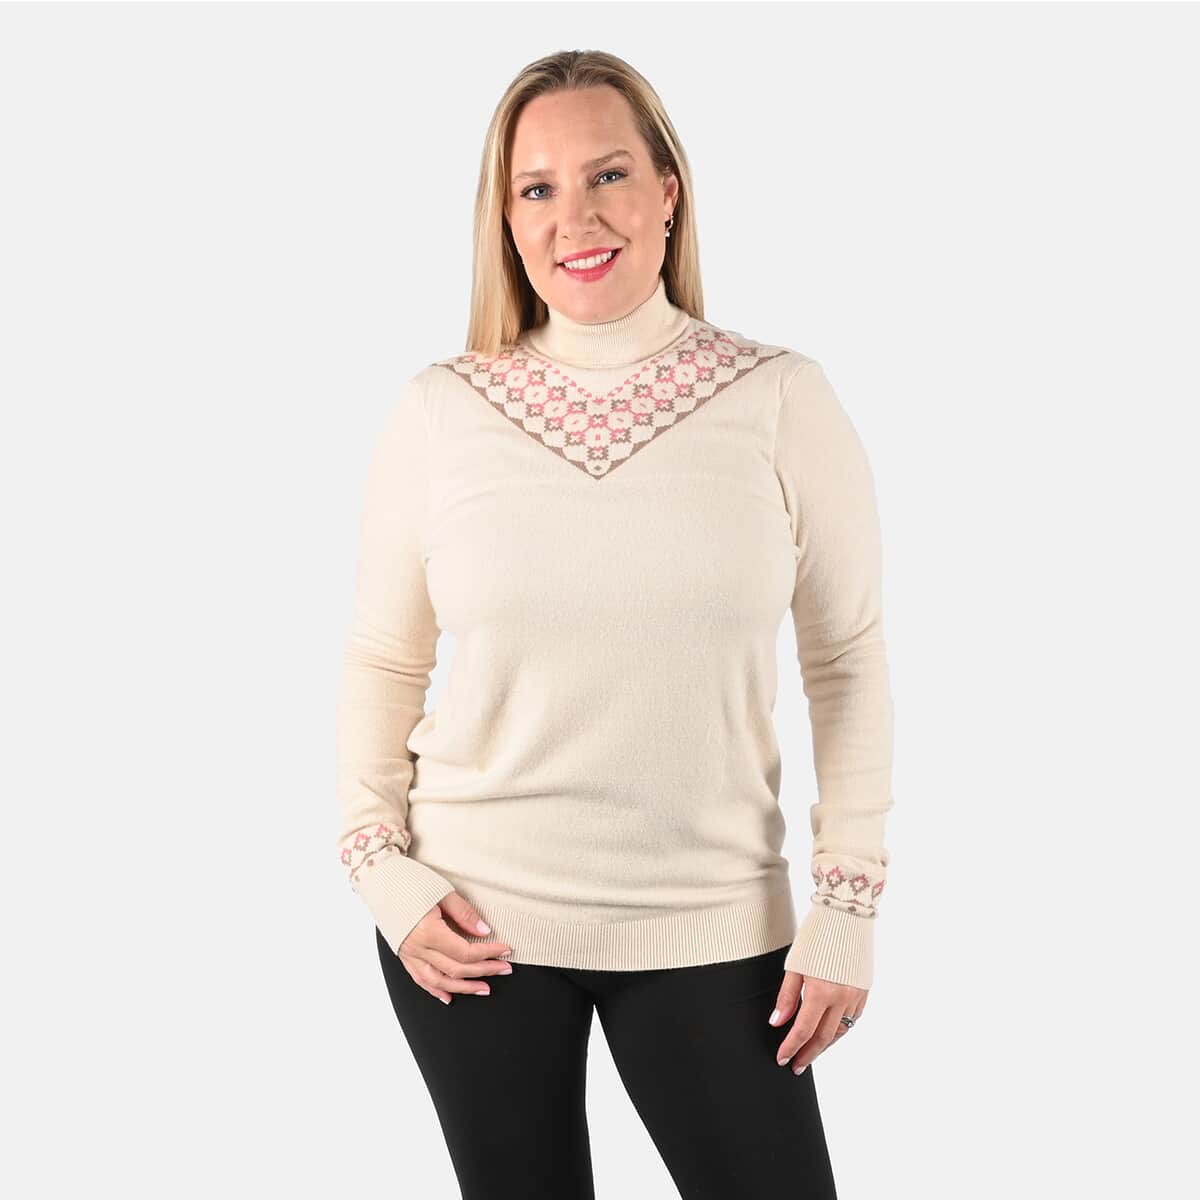 Tamsy Cream Knit Turtle Neck with Diamond Pattern Sweater - L image number 3